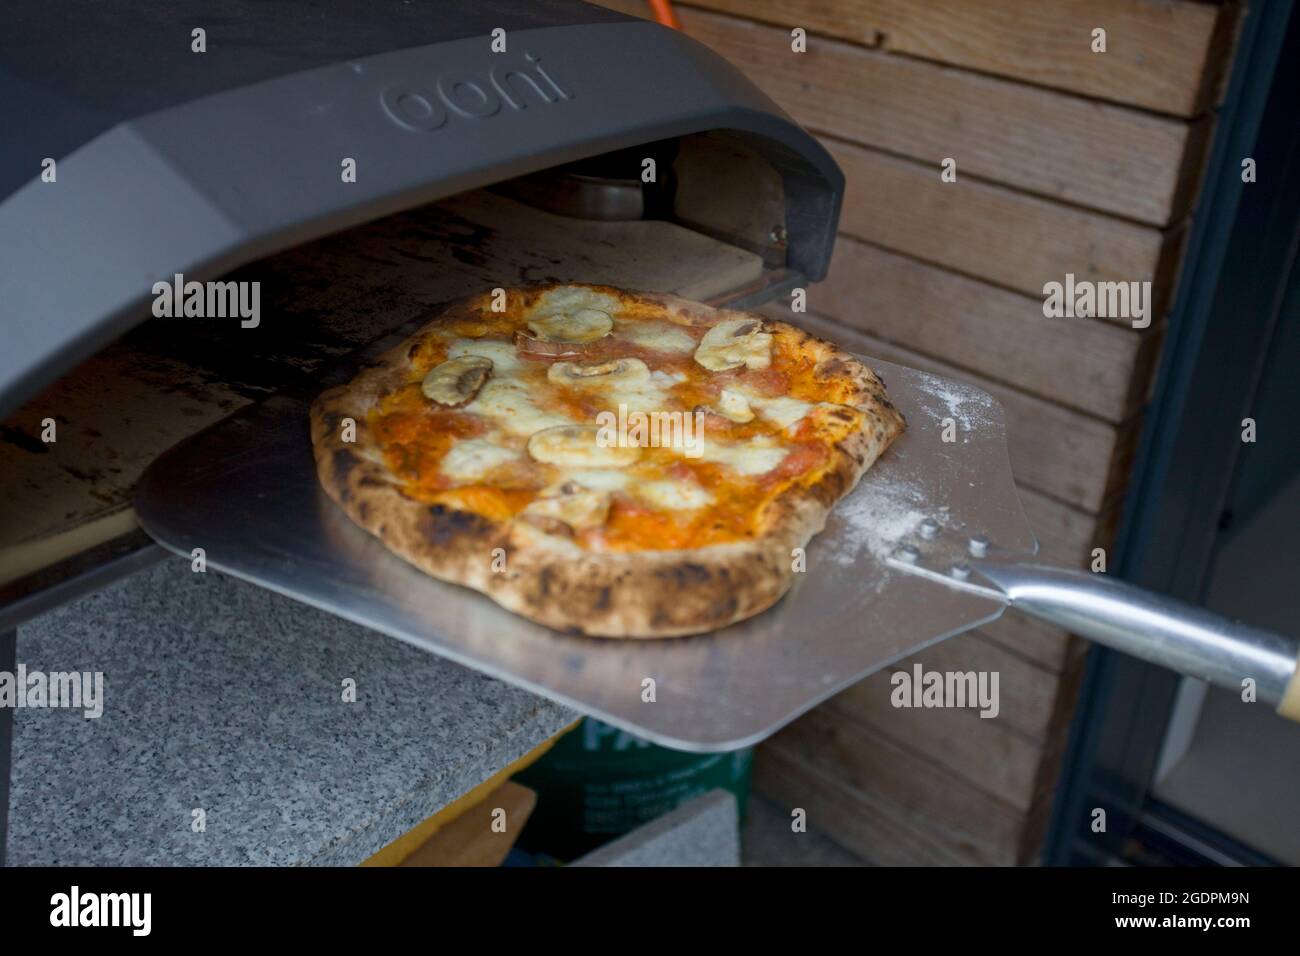 OONI Pizza oven with cooked pizza Stock Photo